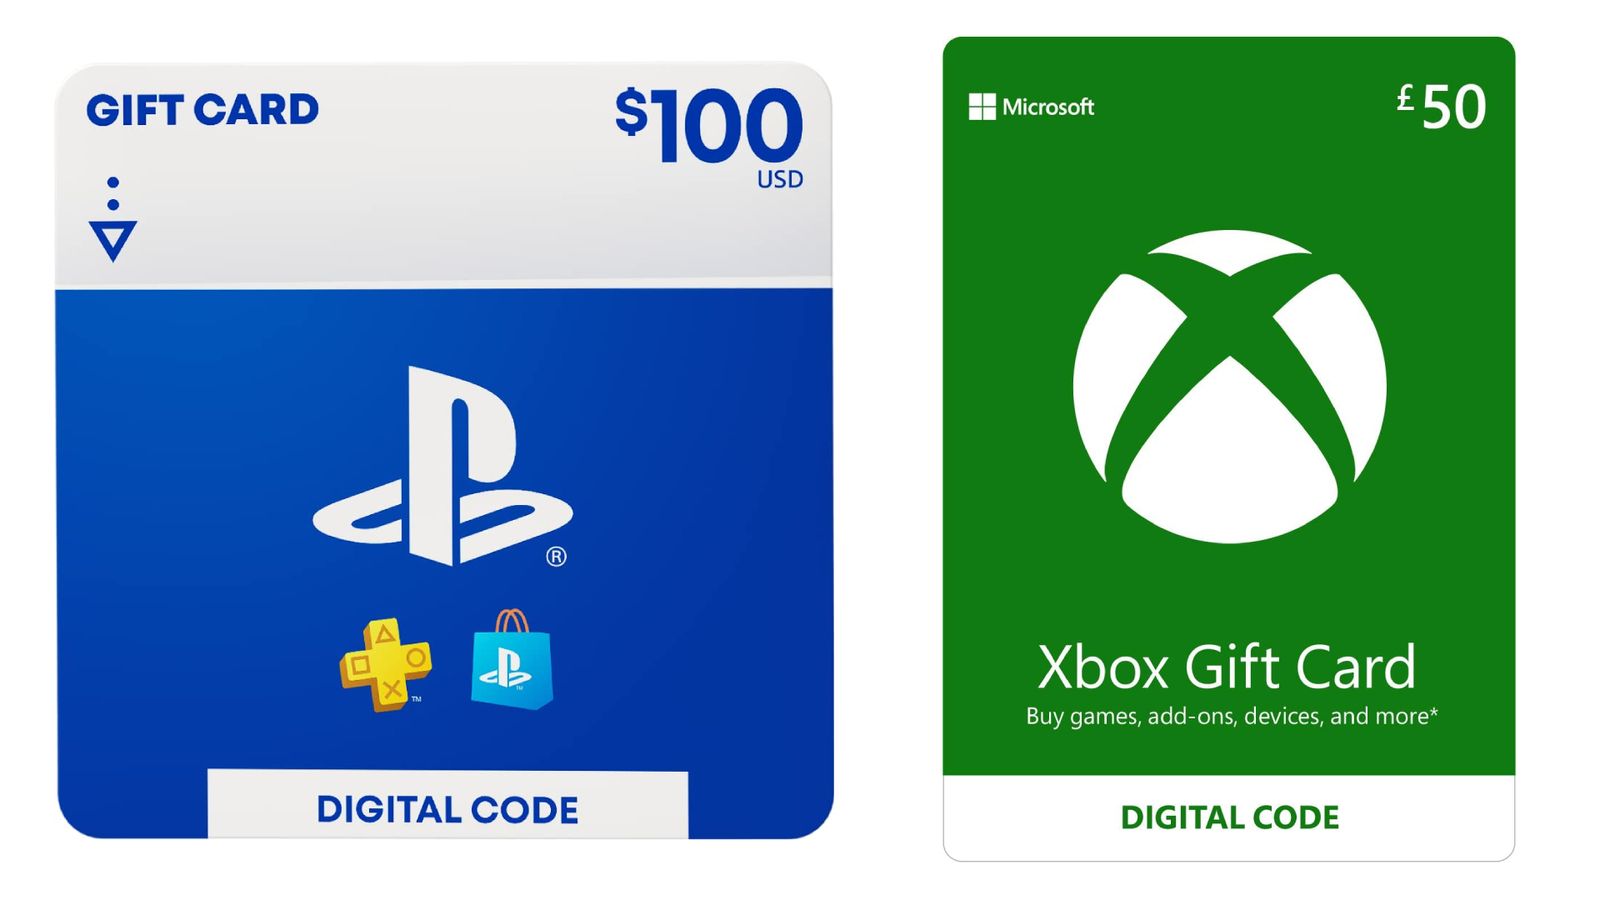 A blue and white PlayStation gift card on the left, and a white and green Xbox gift card on the right.